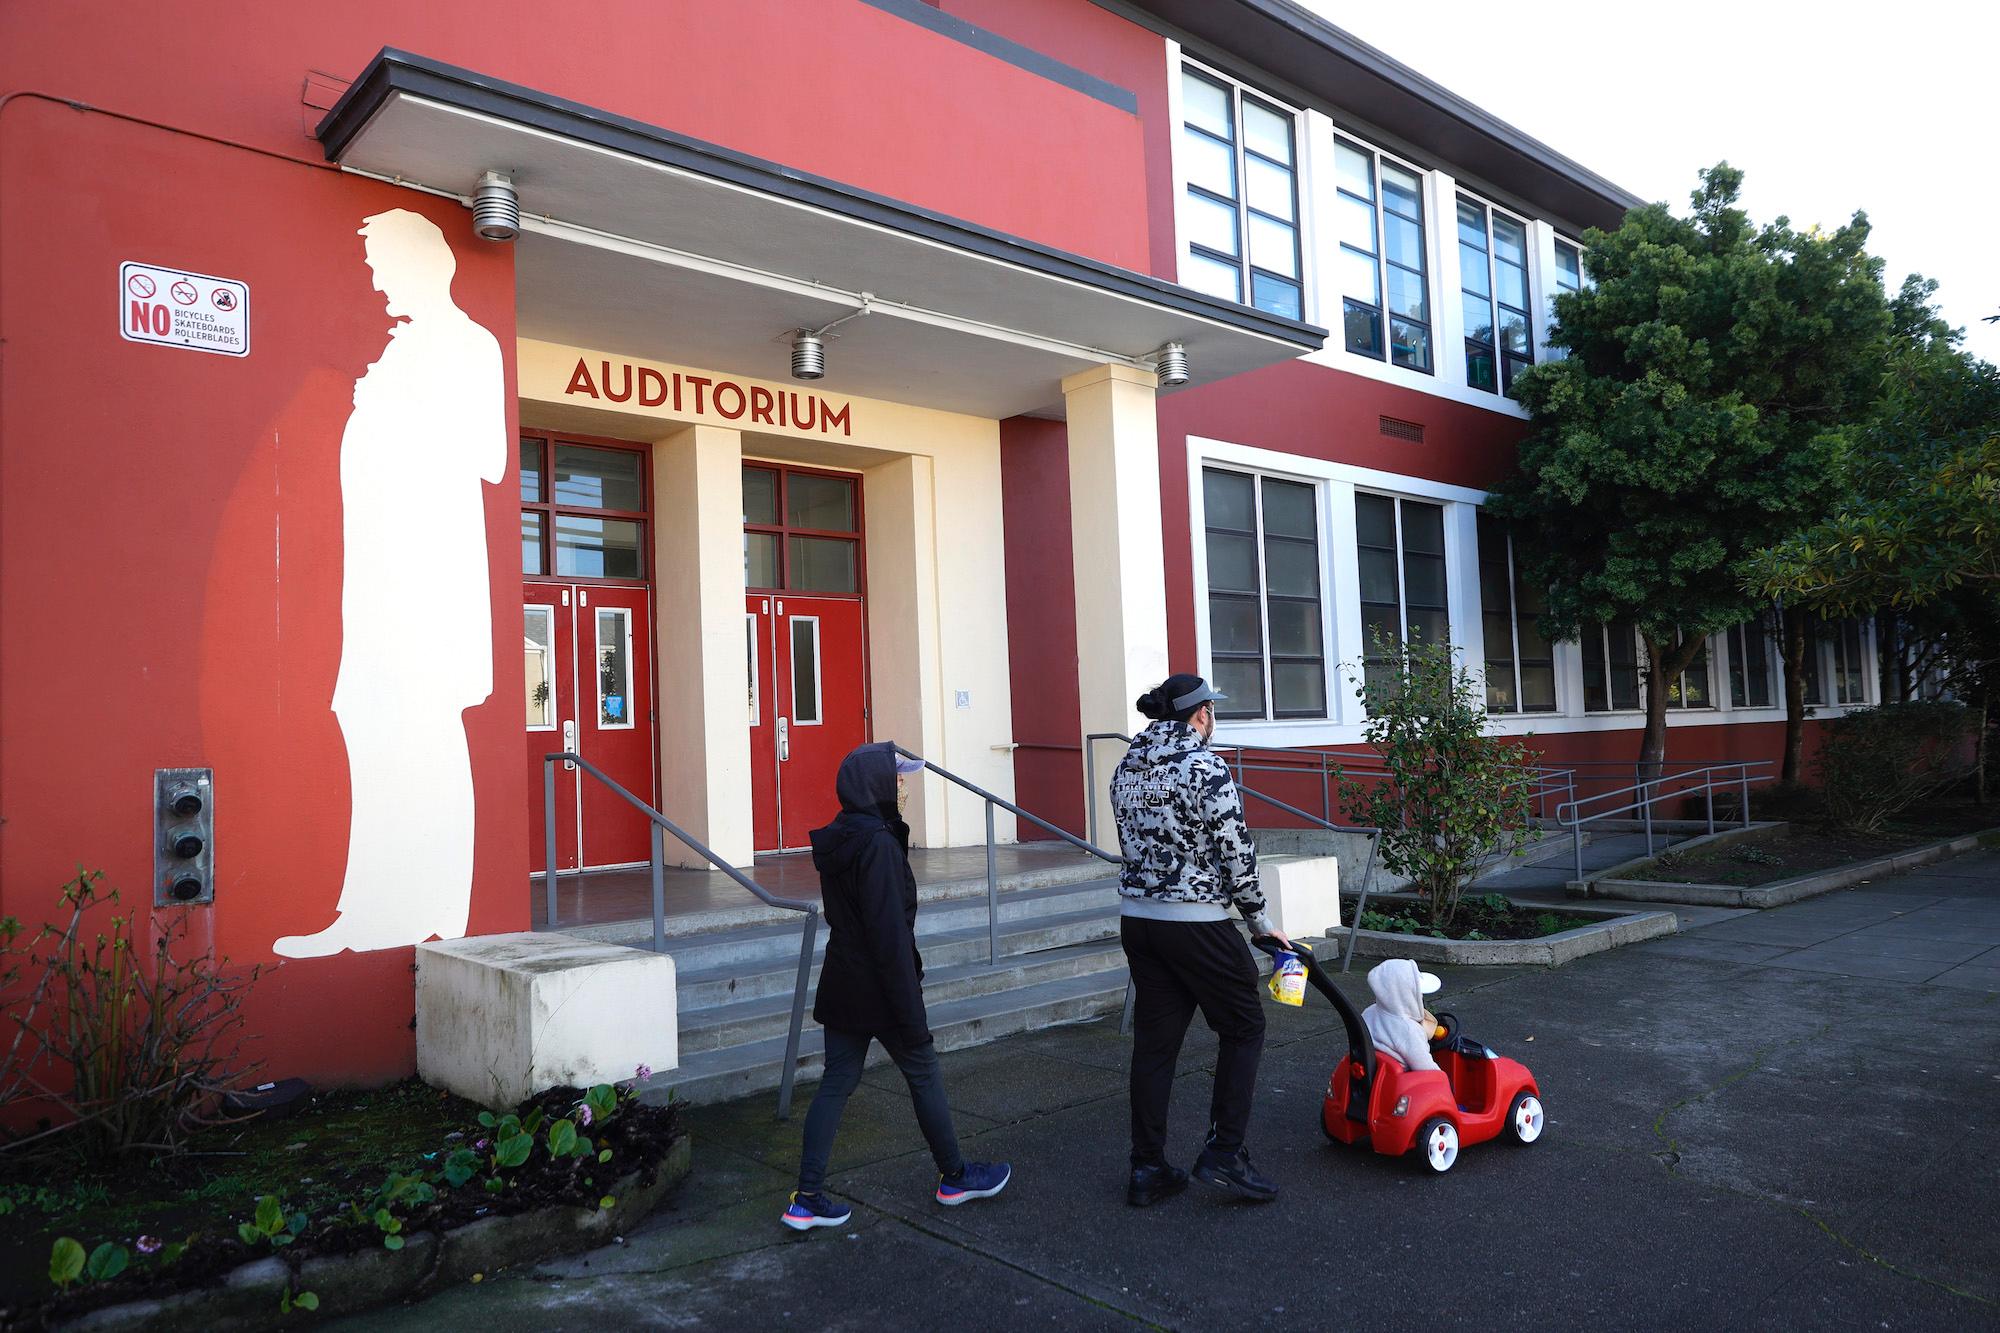 In San Francisco, Educational Facility Downsizing Could Add New Housing